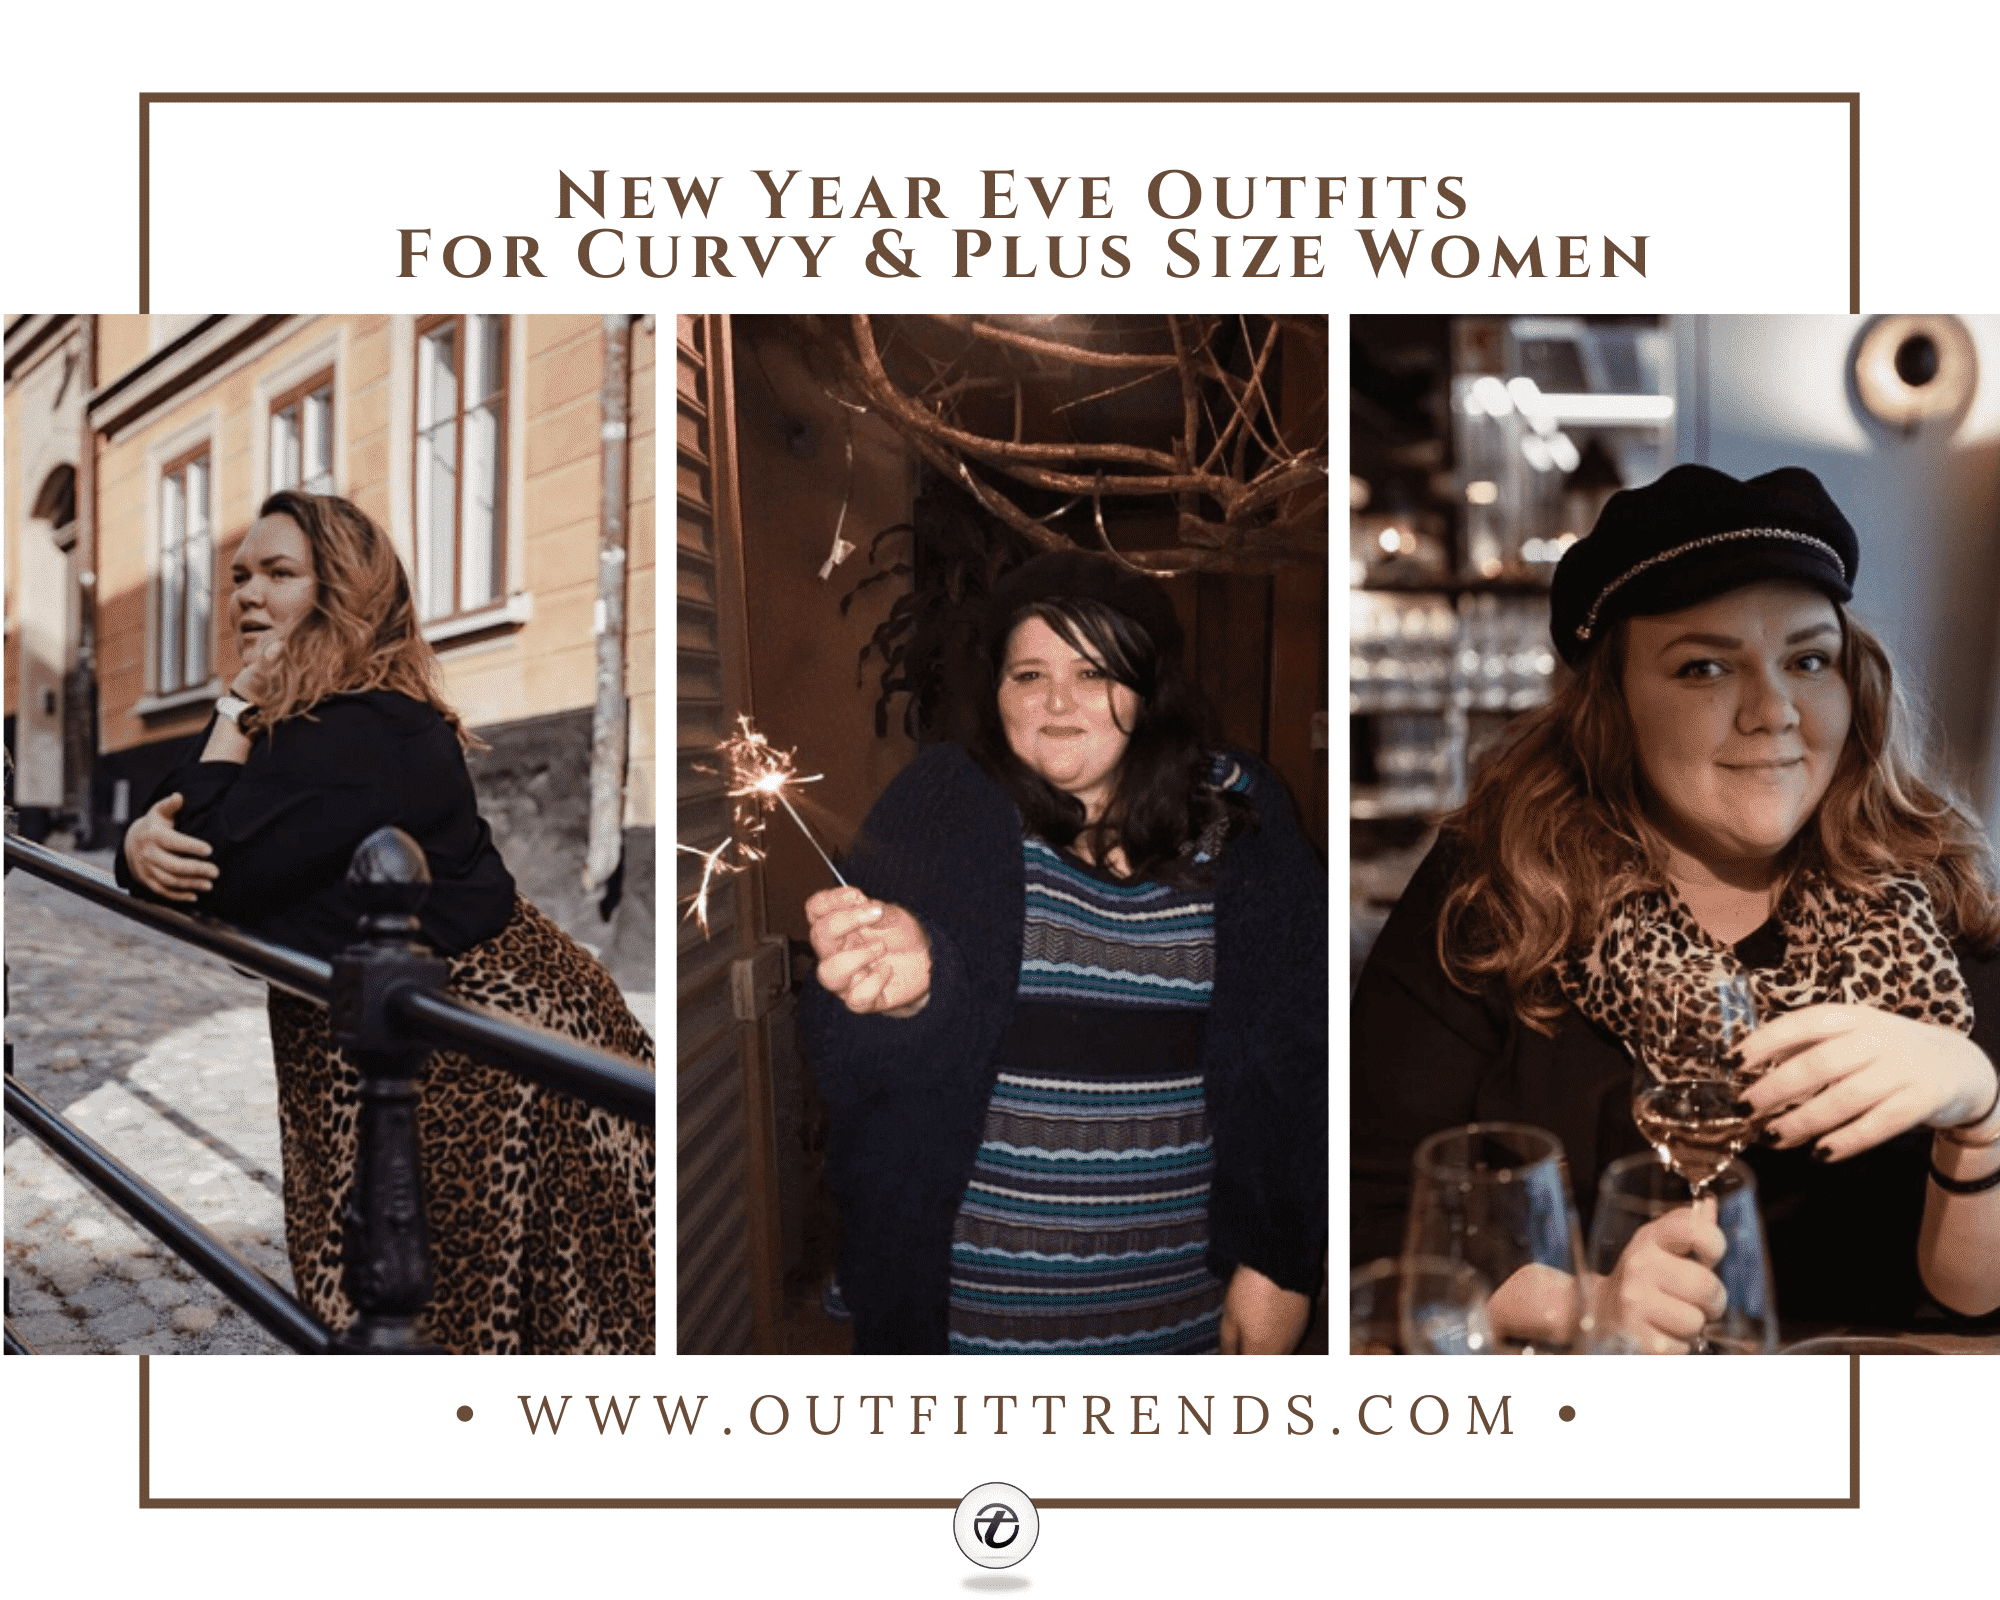 25 New Year’s Eve Outfits for Plus-Size Women